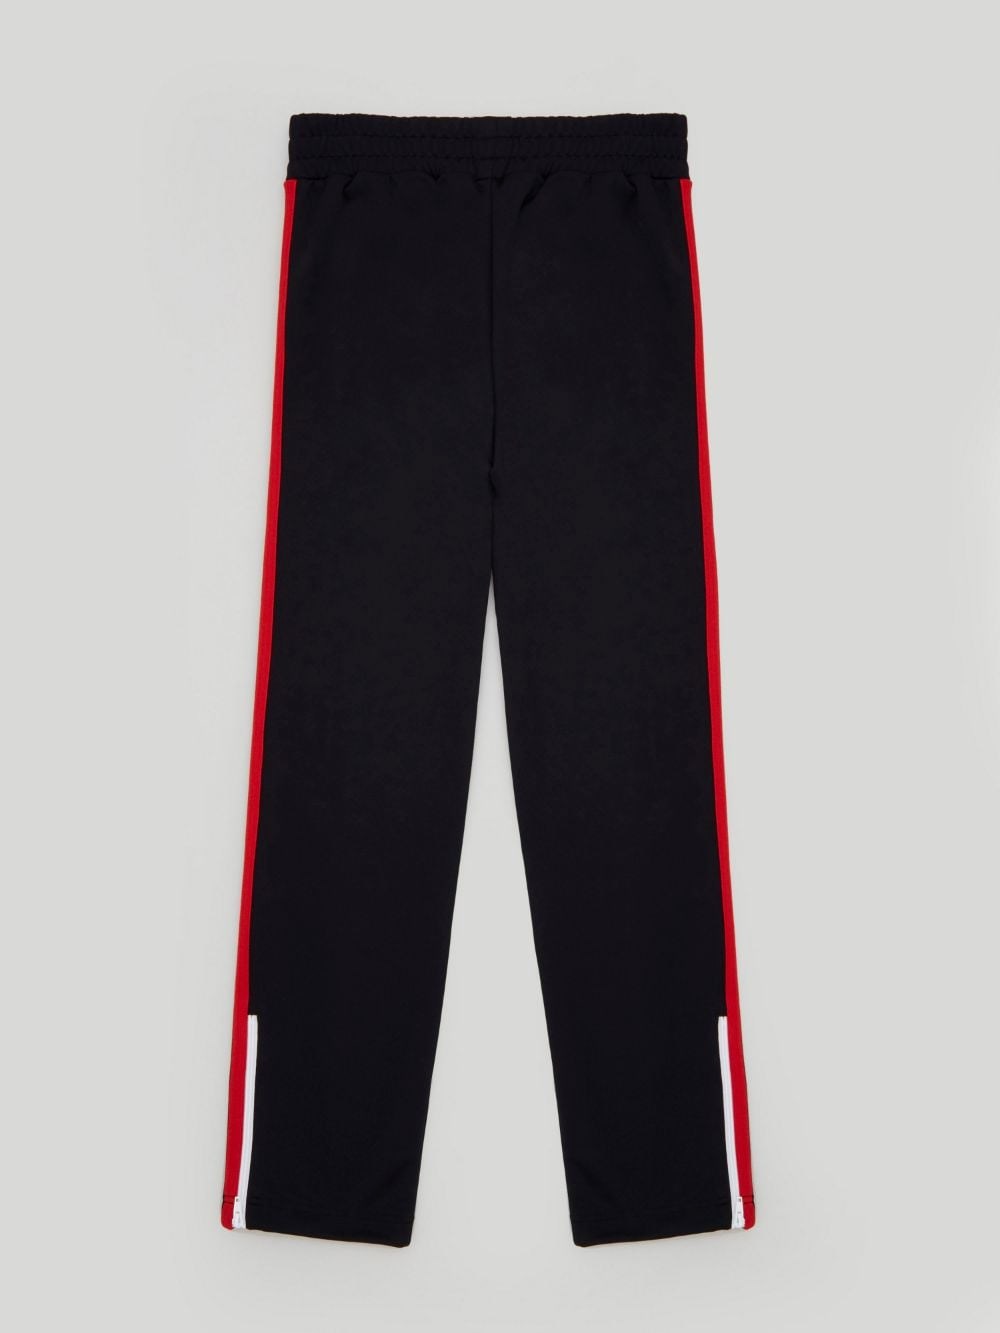 palm angels EXODUS TROUSERS available on montiboutique.com - 41064